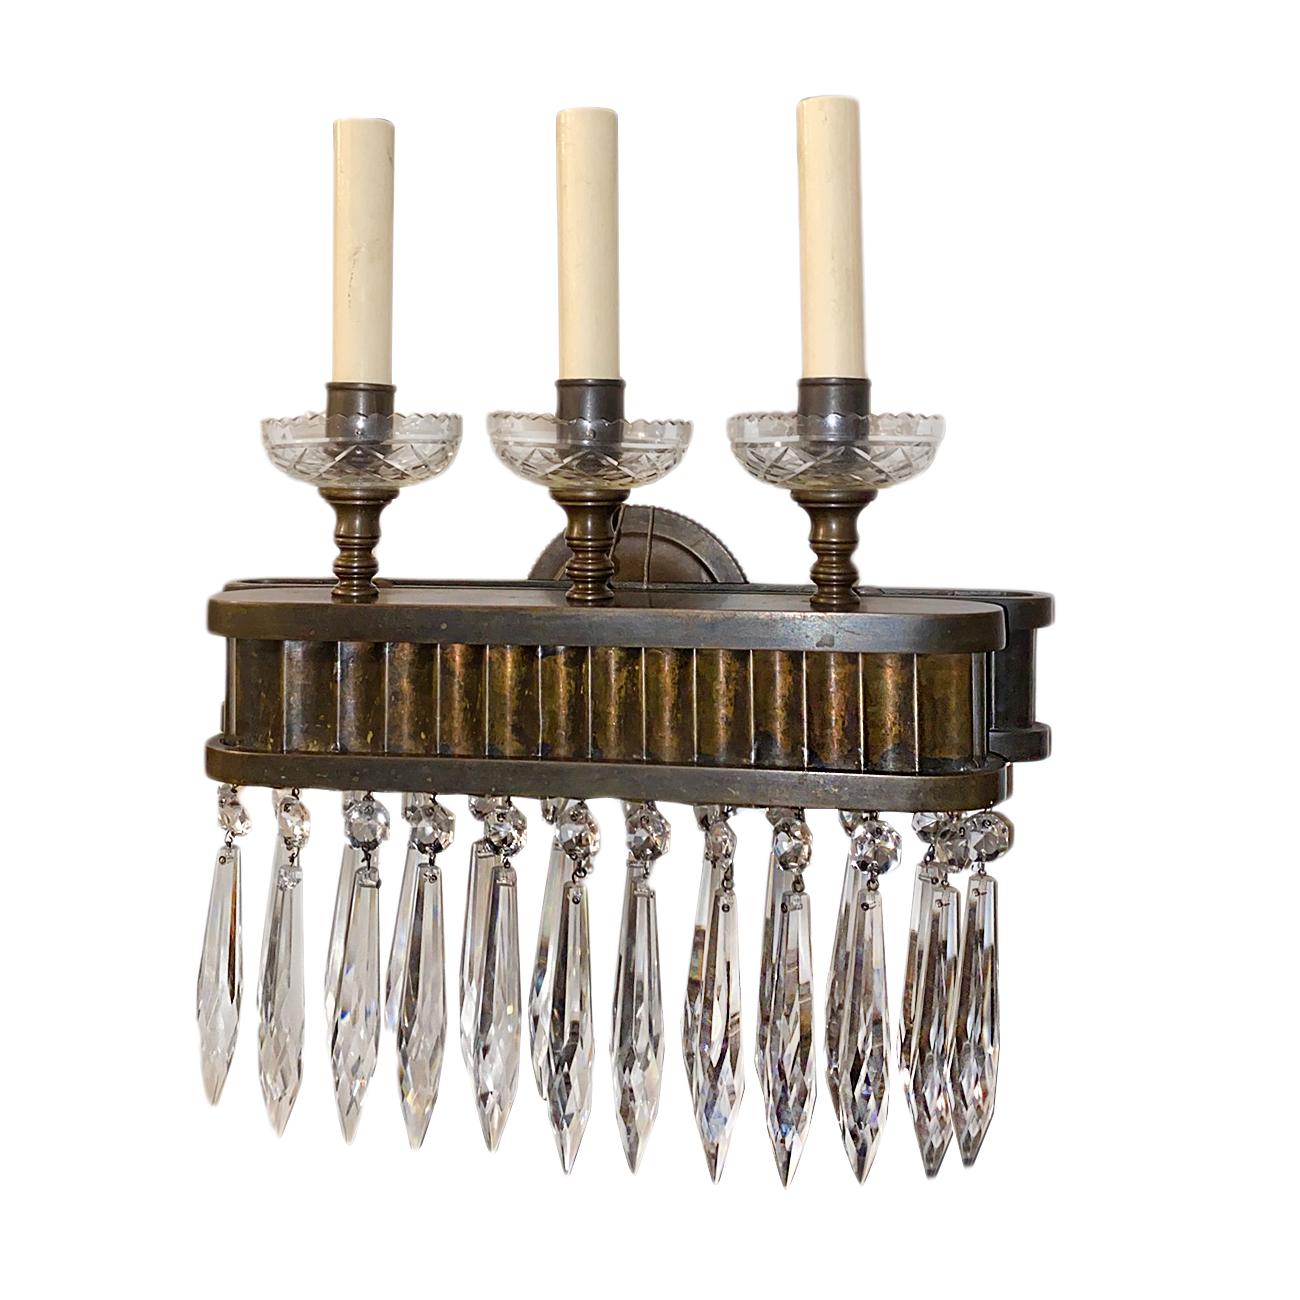 A set of four circa 1930s French bronze and crystal sconces. Sold per pair.

Measurements:
Height 15